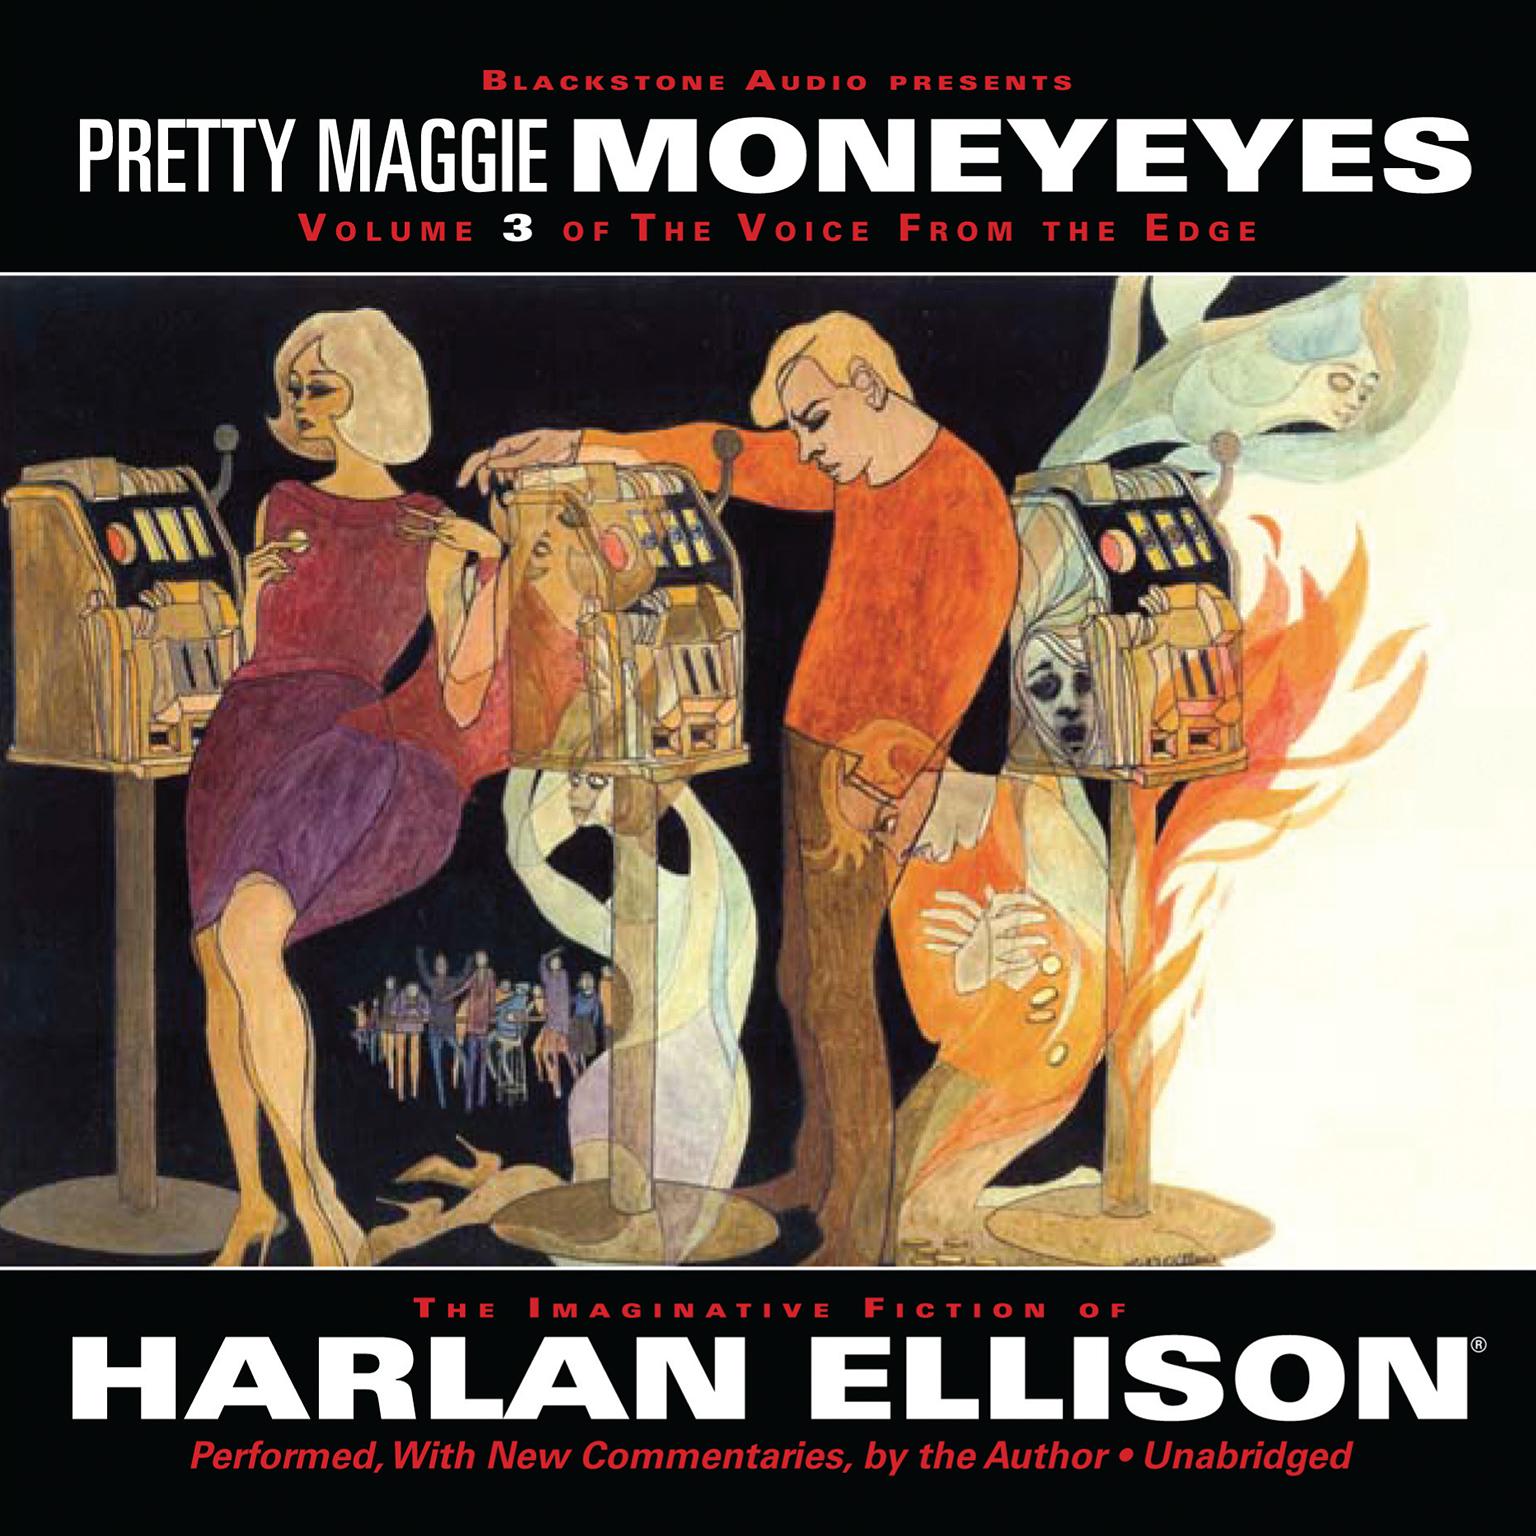 The Voice from the Edge, Vol. 3: Pretty Maggie Moneyeyes Audiobook, by Harlan Ellison